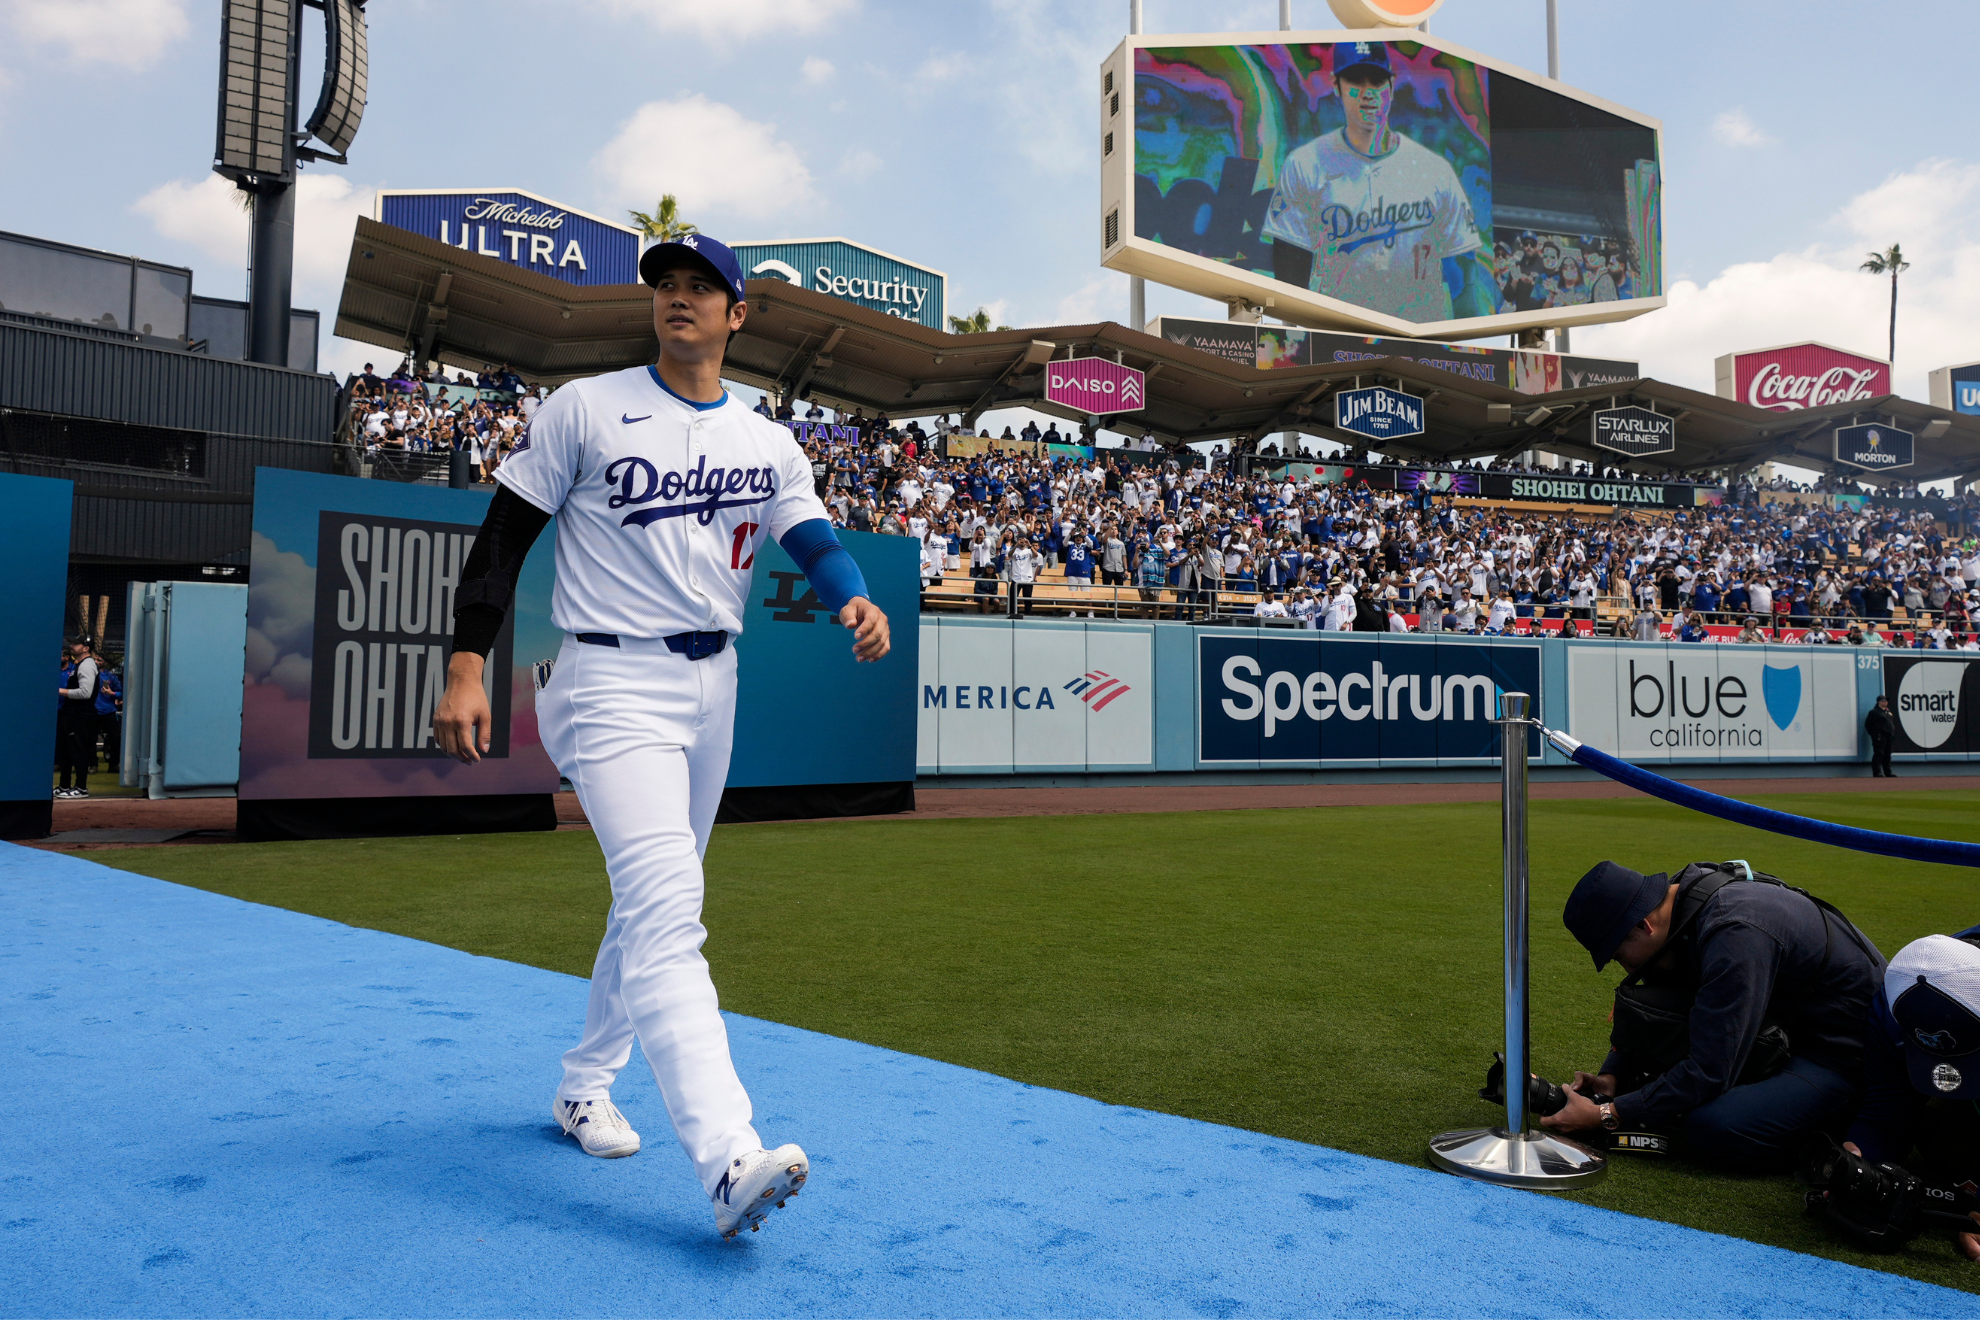 Ohtani during his introduction at Dodger Stadium on Thursday.